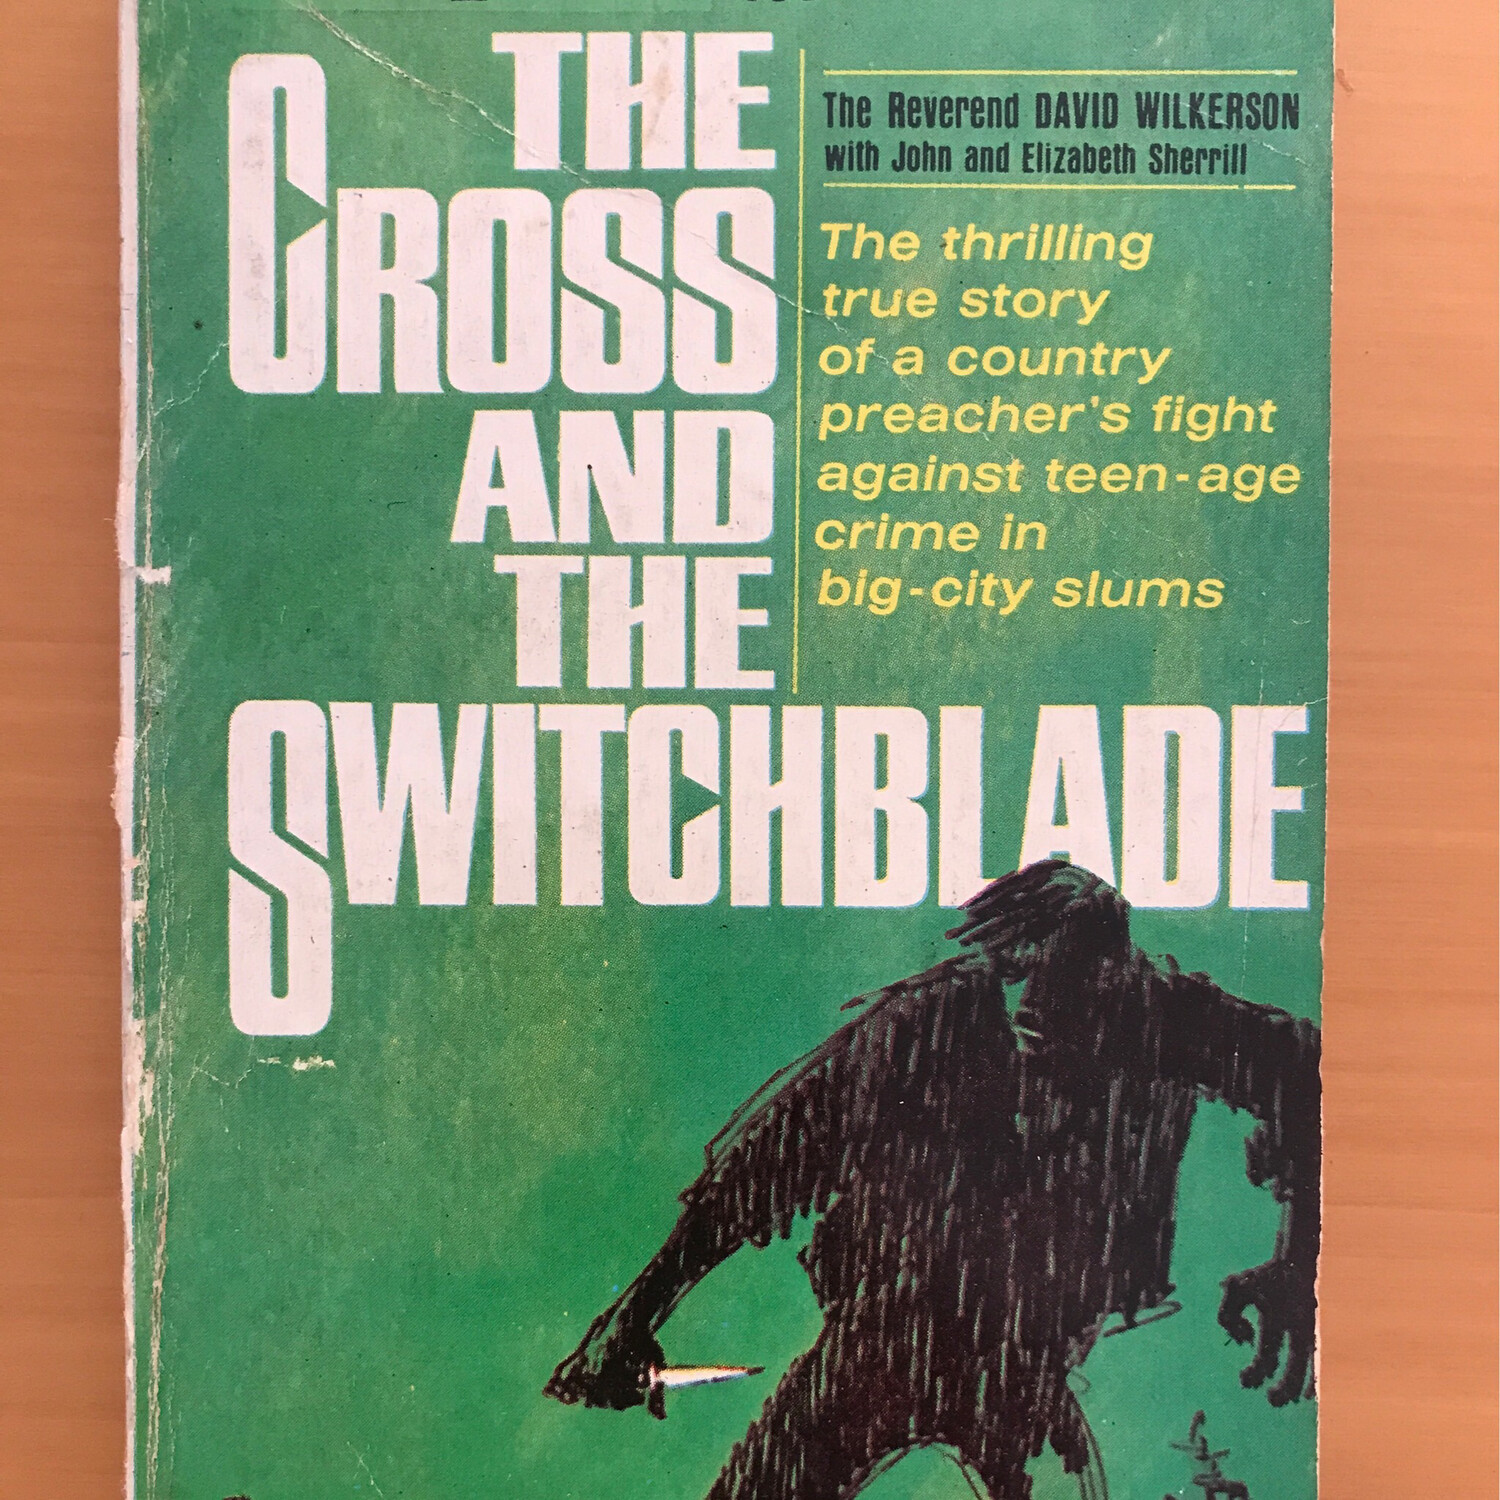 The Cross And The Switchblade, The reverend David Wilkerson